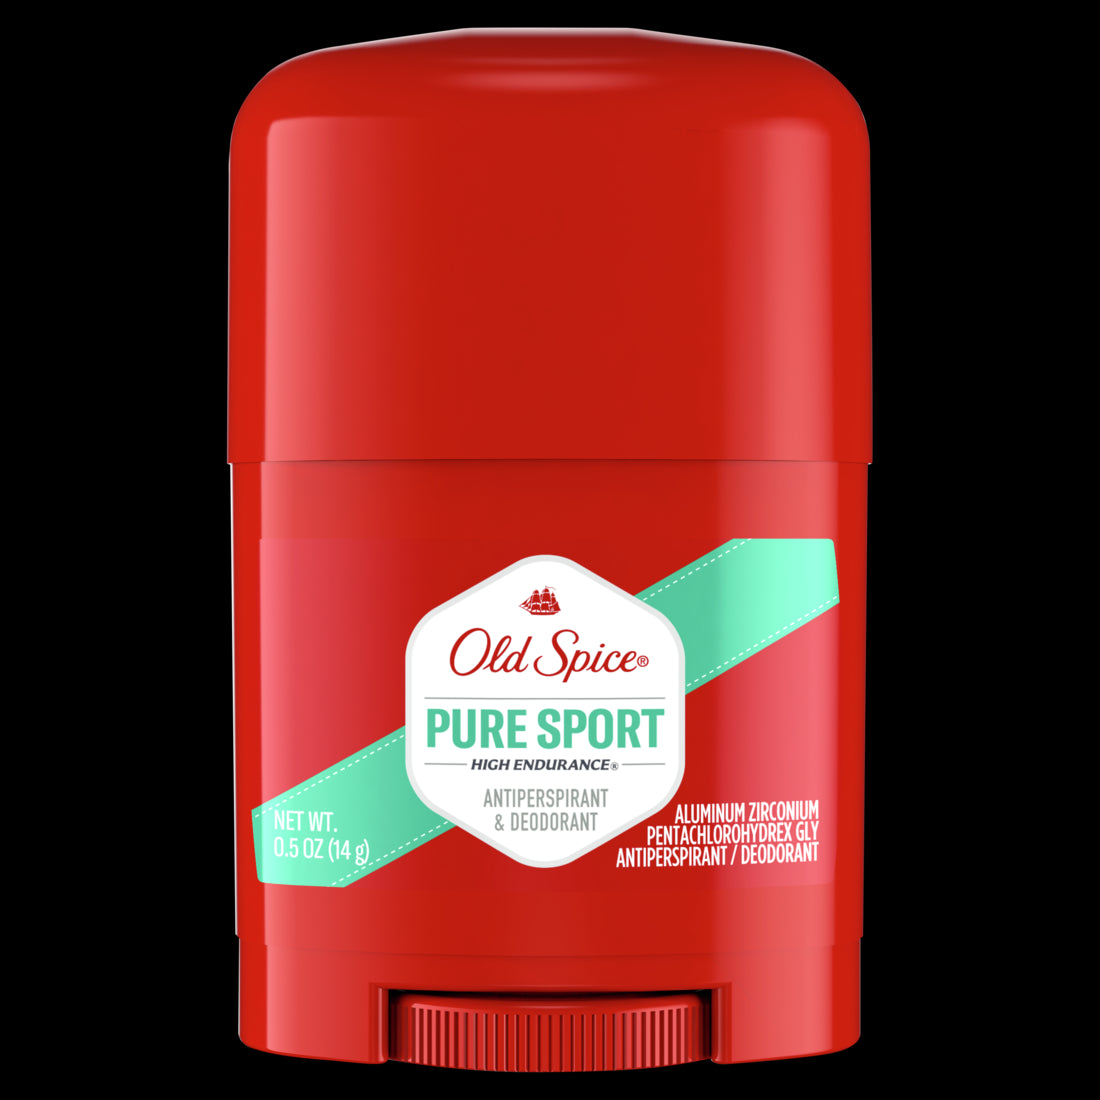 Old SPice High Endurance Pure Sport Antiperspirant and Deodorant 0.5oz/24pk